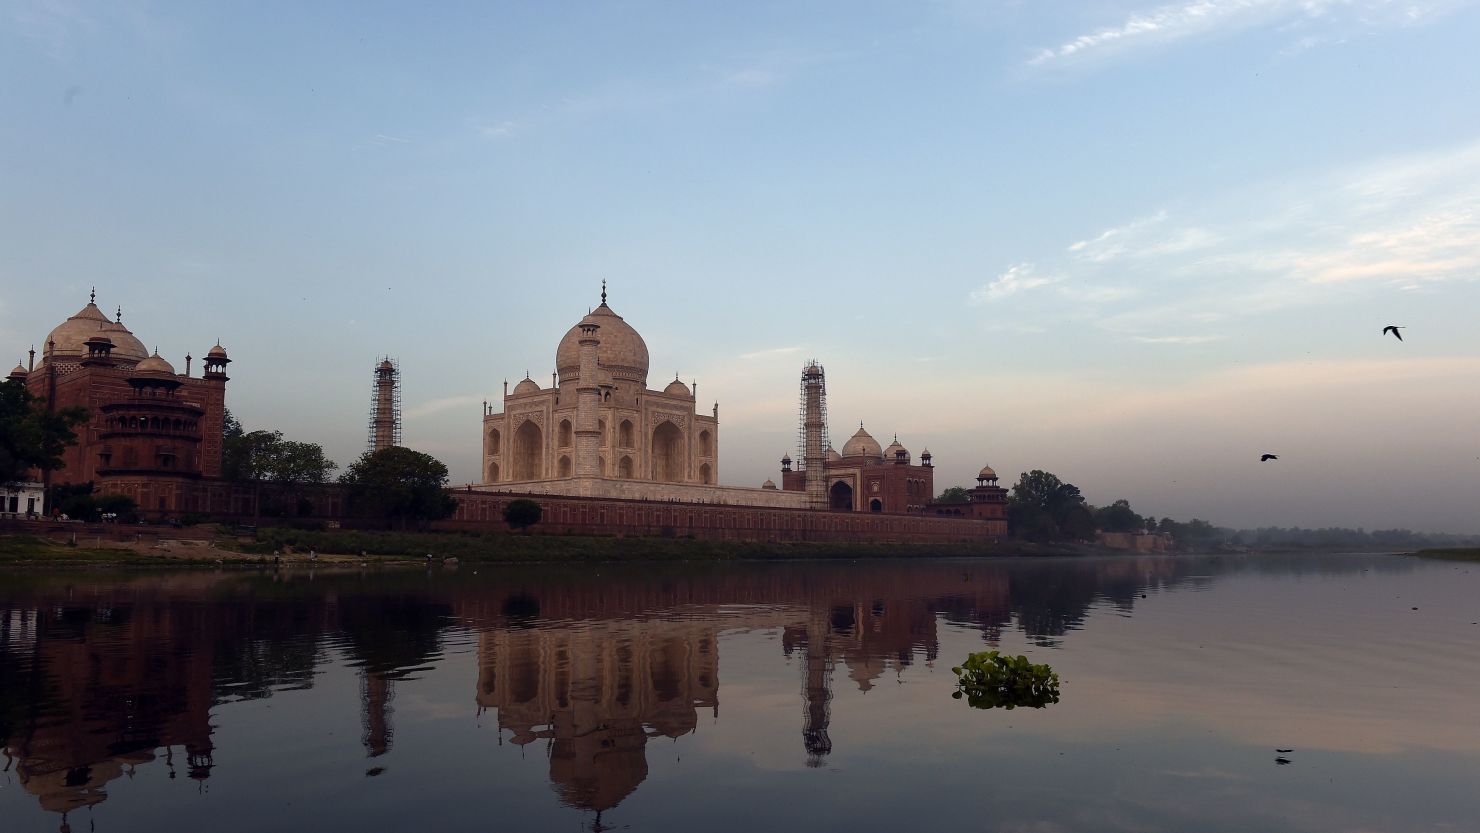 The Taj Mahal relection is seen on Yamuna river in Agra on April 16, 2016.
Britain's Prince William, Duke of Cambridge and Catherine, Duchess of Cambridge are schedule to visit Taj Mahal later in the day, during the last leg of their India-Bhutan visit. / AFP / Prakash SINGH        (Photo credit should read PRAKASH SINGH/AFP/Getty Images)